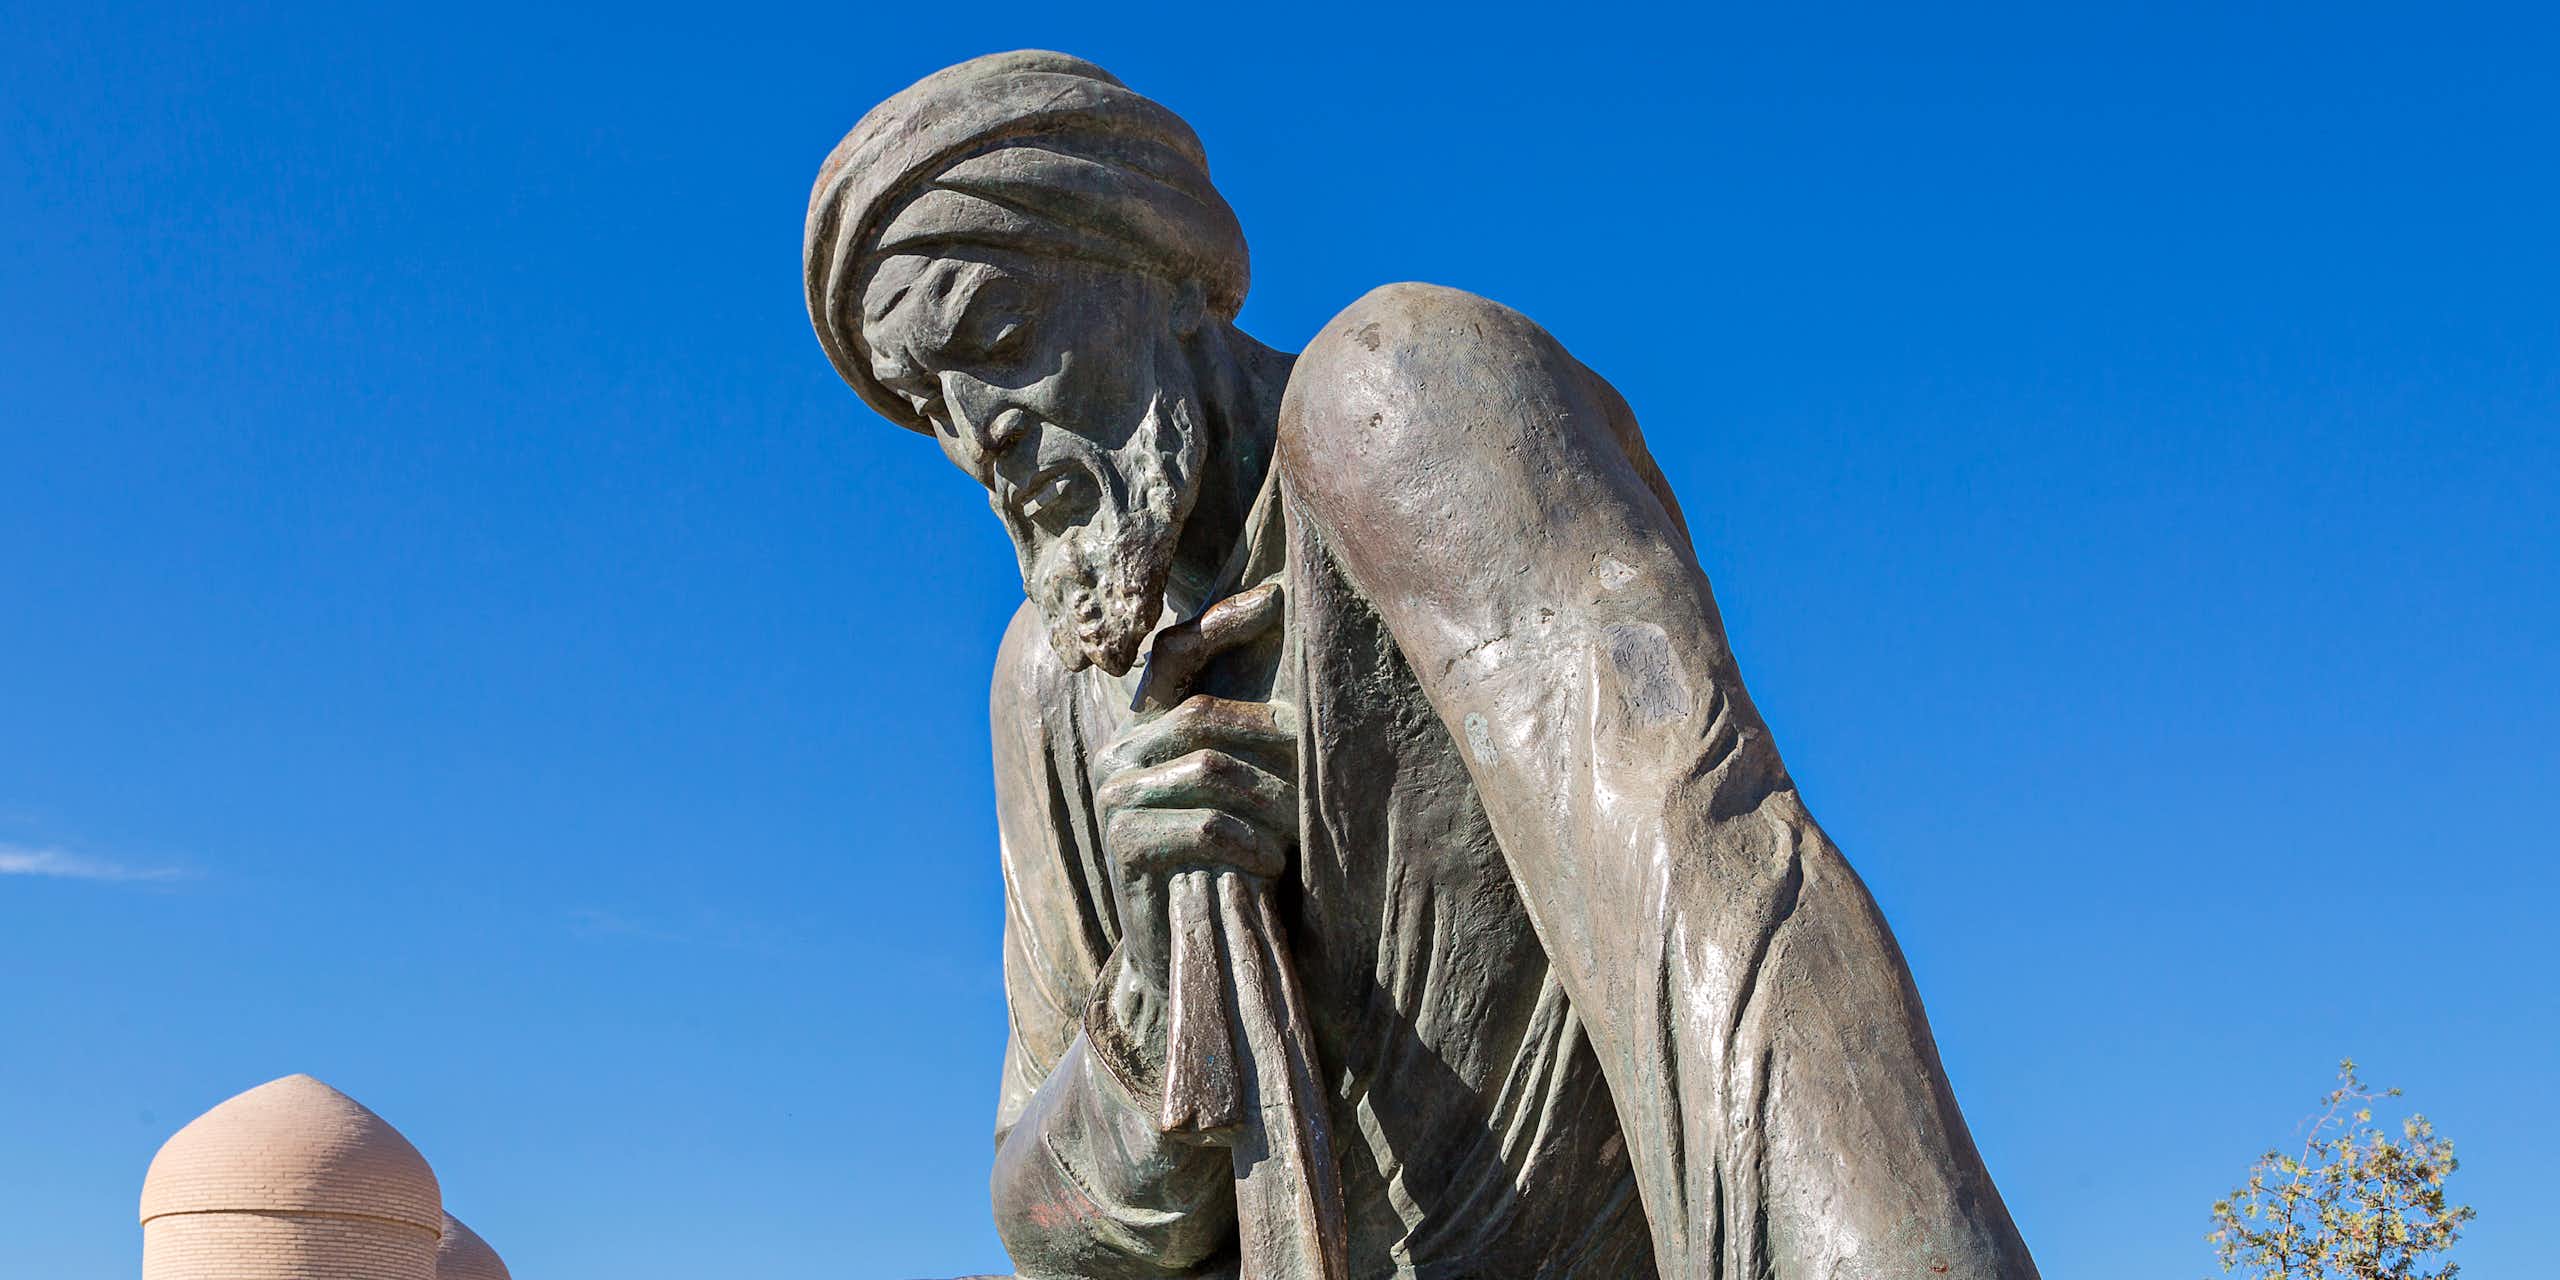 A grey stone figure with chiseled features and a turban set against a blue sky.